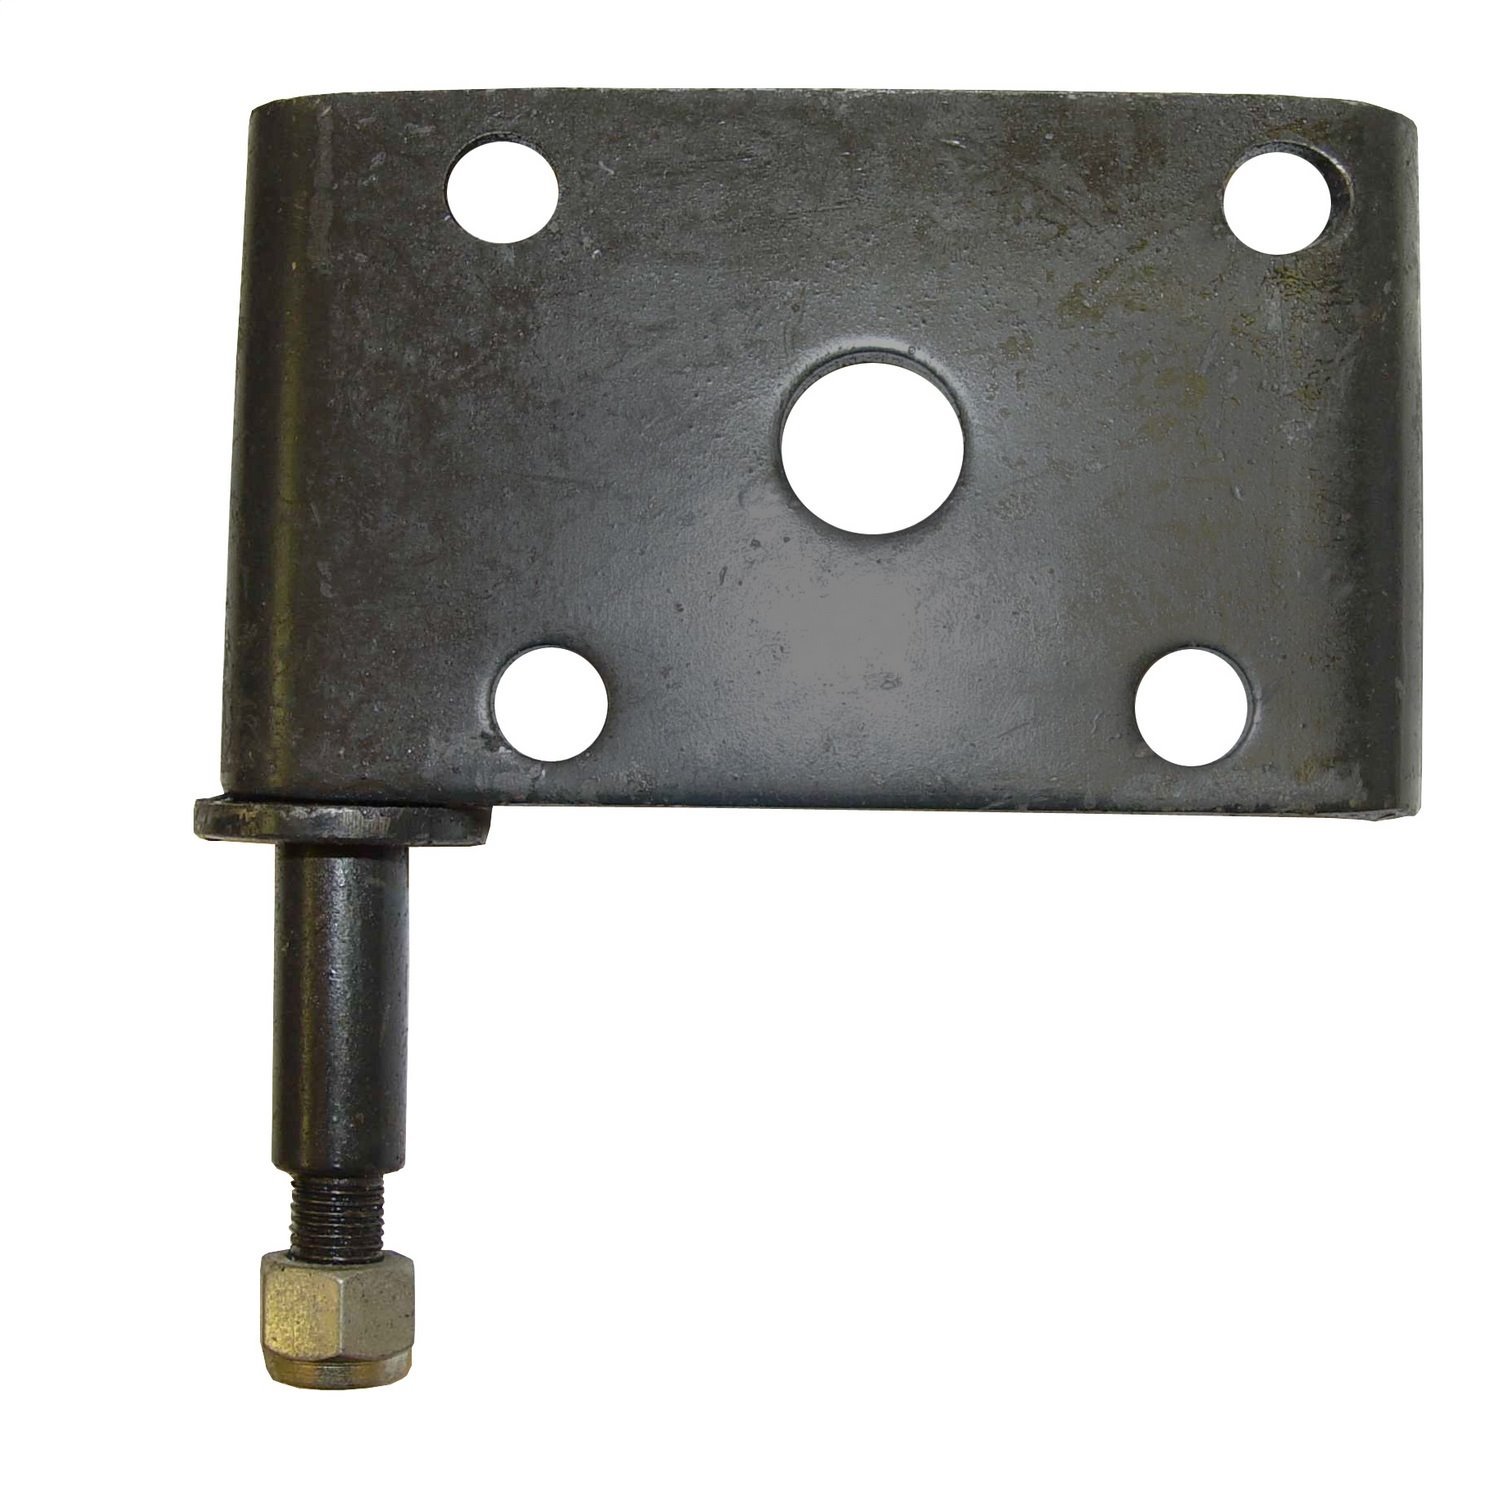 left front replacement leaf spring plate from Omix-ADA,